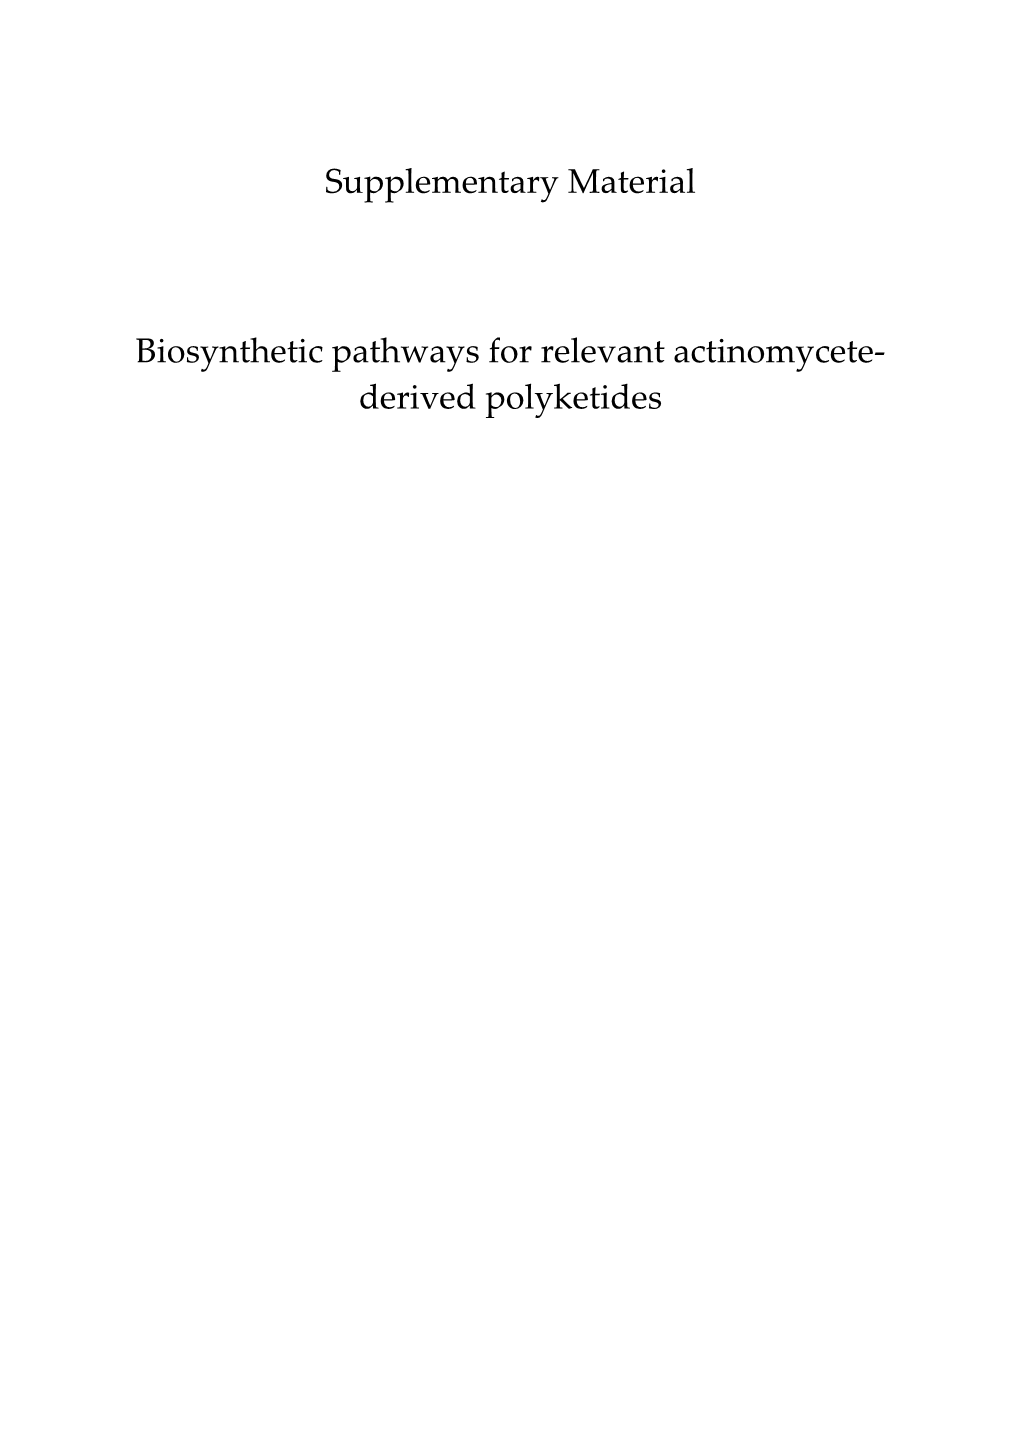 Supplementary Material Biosynthetic Pathways for Relevant